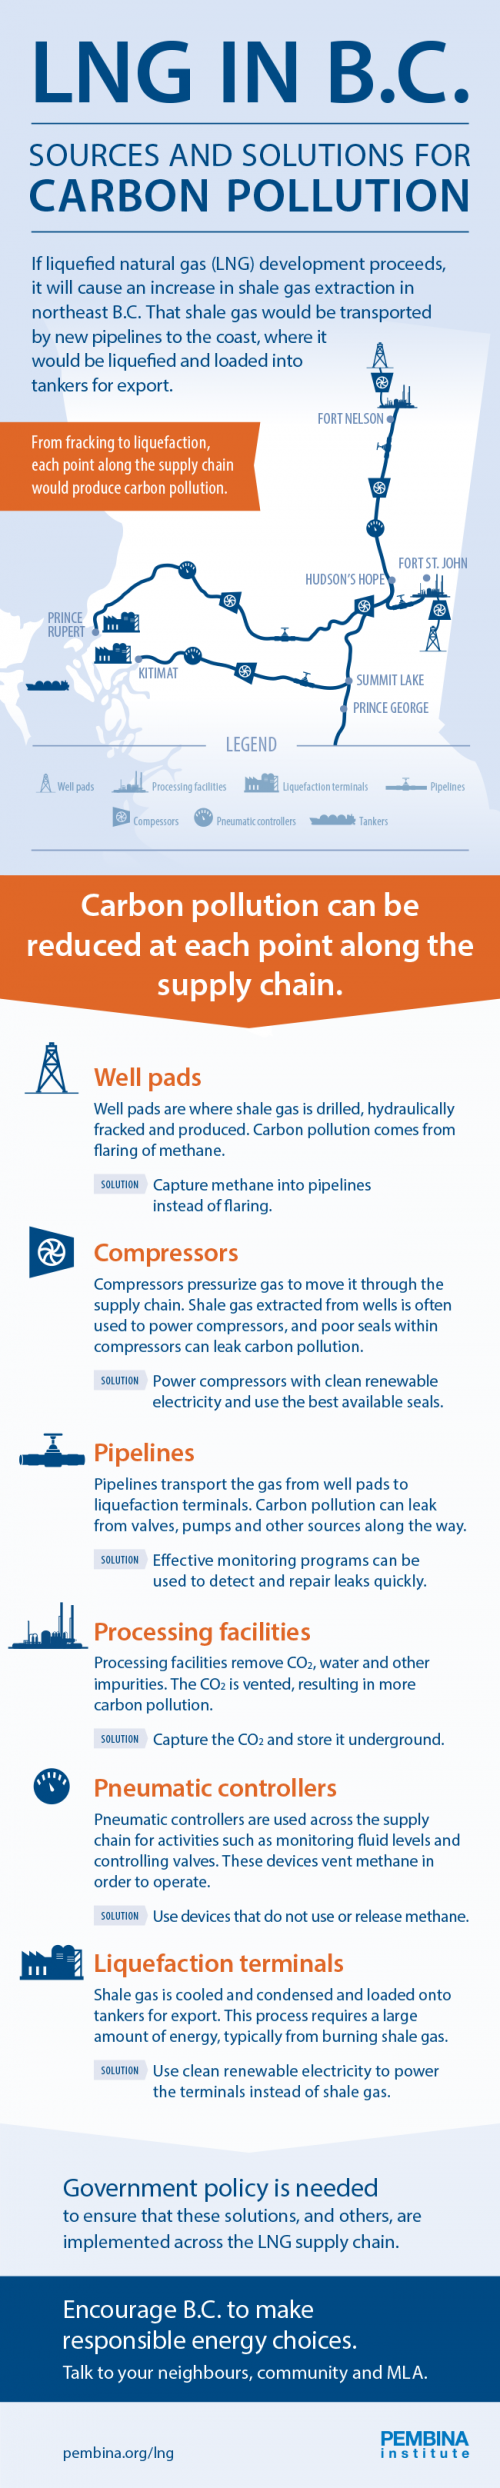 LNG supply chain infographic